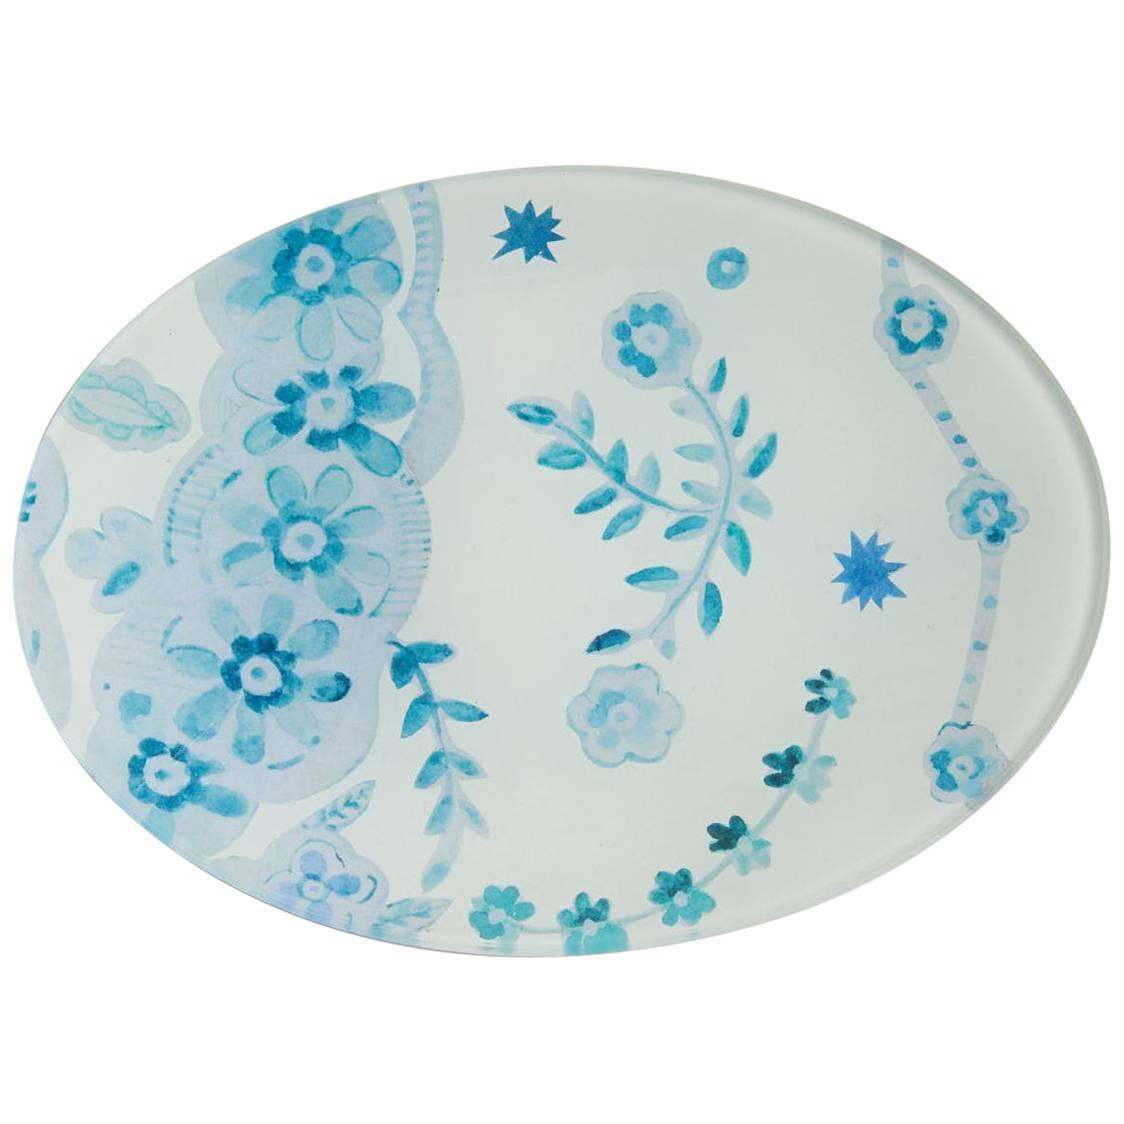 Cathy Graham Decoupage Blue Oval Tray For Sale